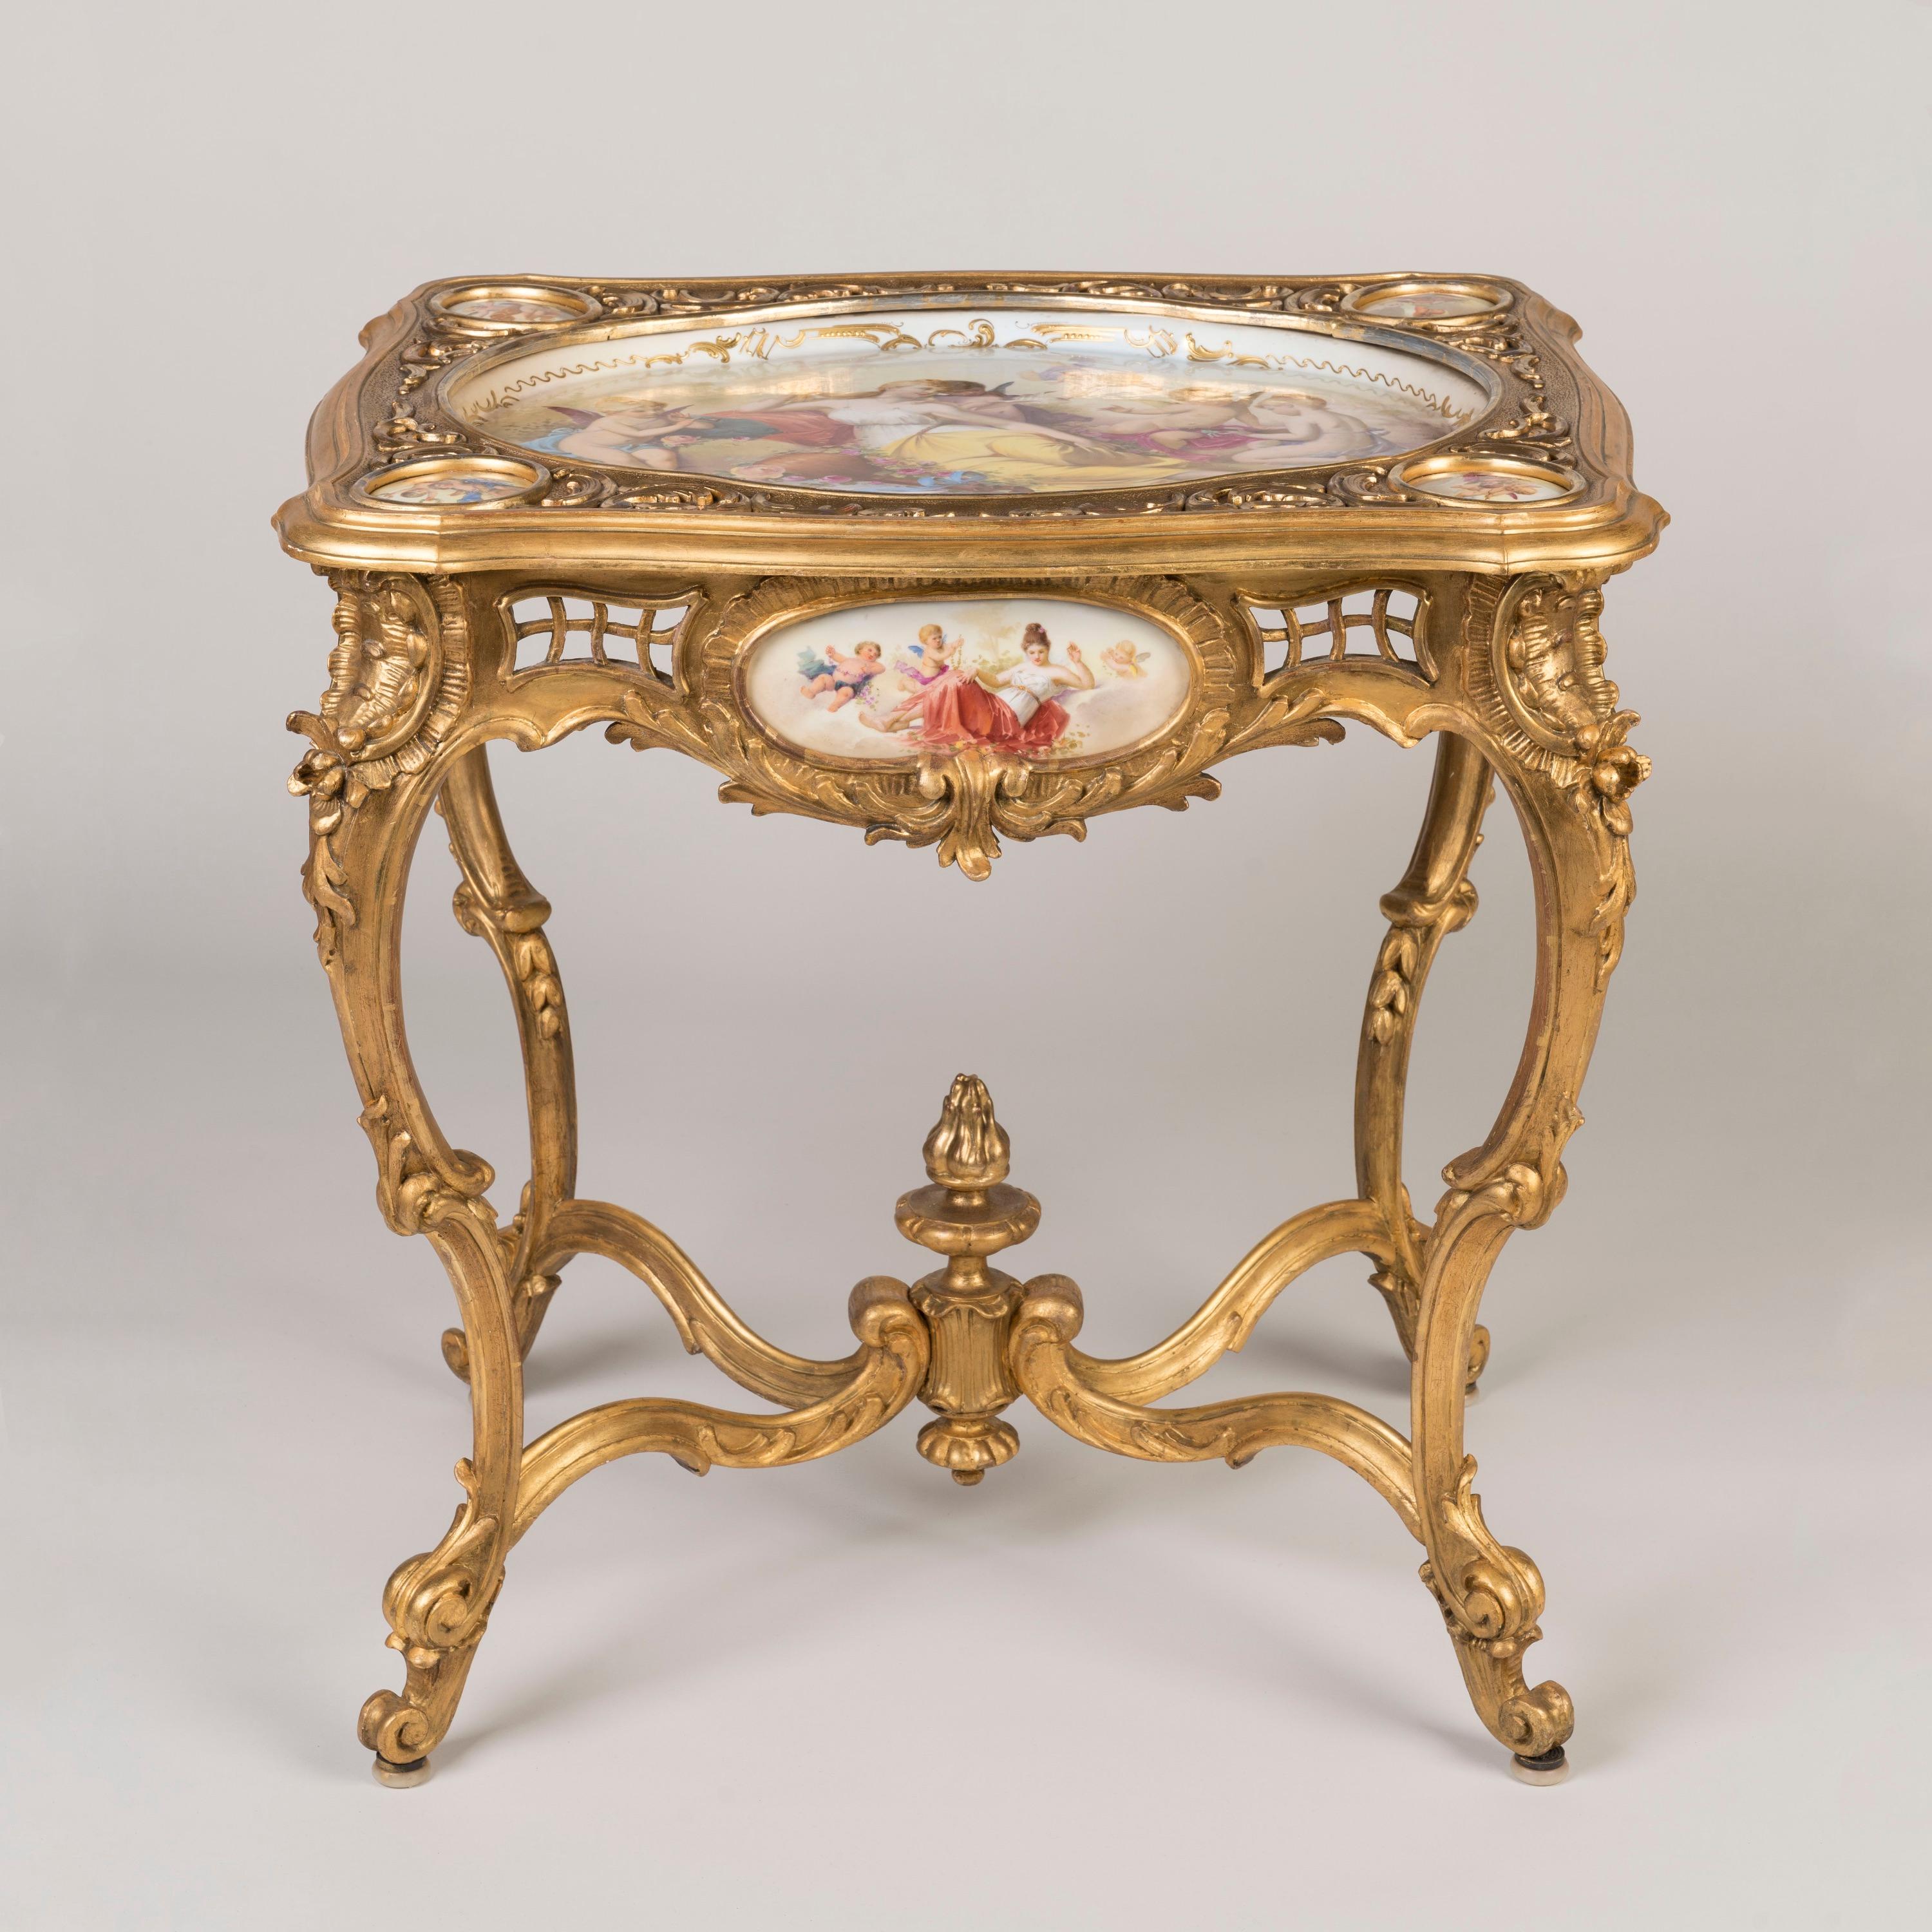 A Fine & Rare Louis XV Style Giltwood Carved Table
Mounted with Hand-Painted Porcelain Panels

Of elegant rococo design with a plethora of scrolling curves, supported on cabriole legs and scrolled feet joined by a shaped stretcher, the top inset